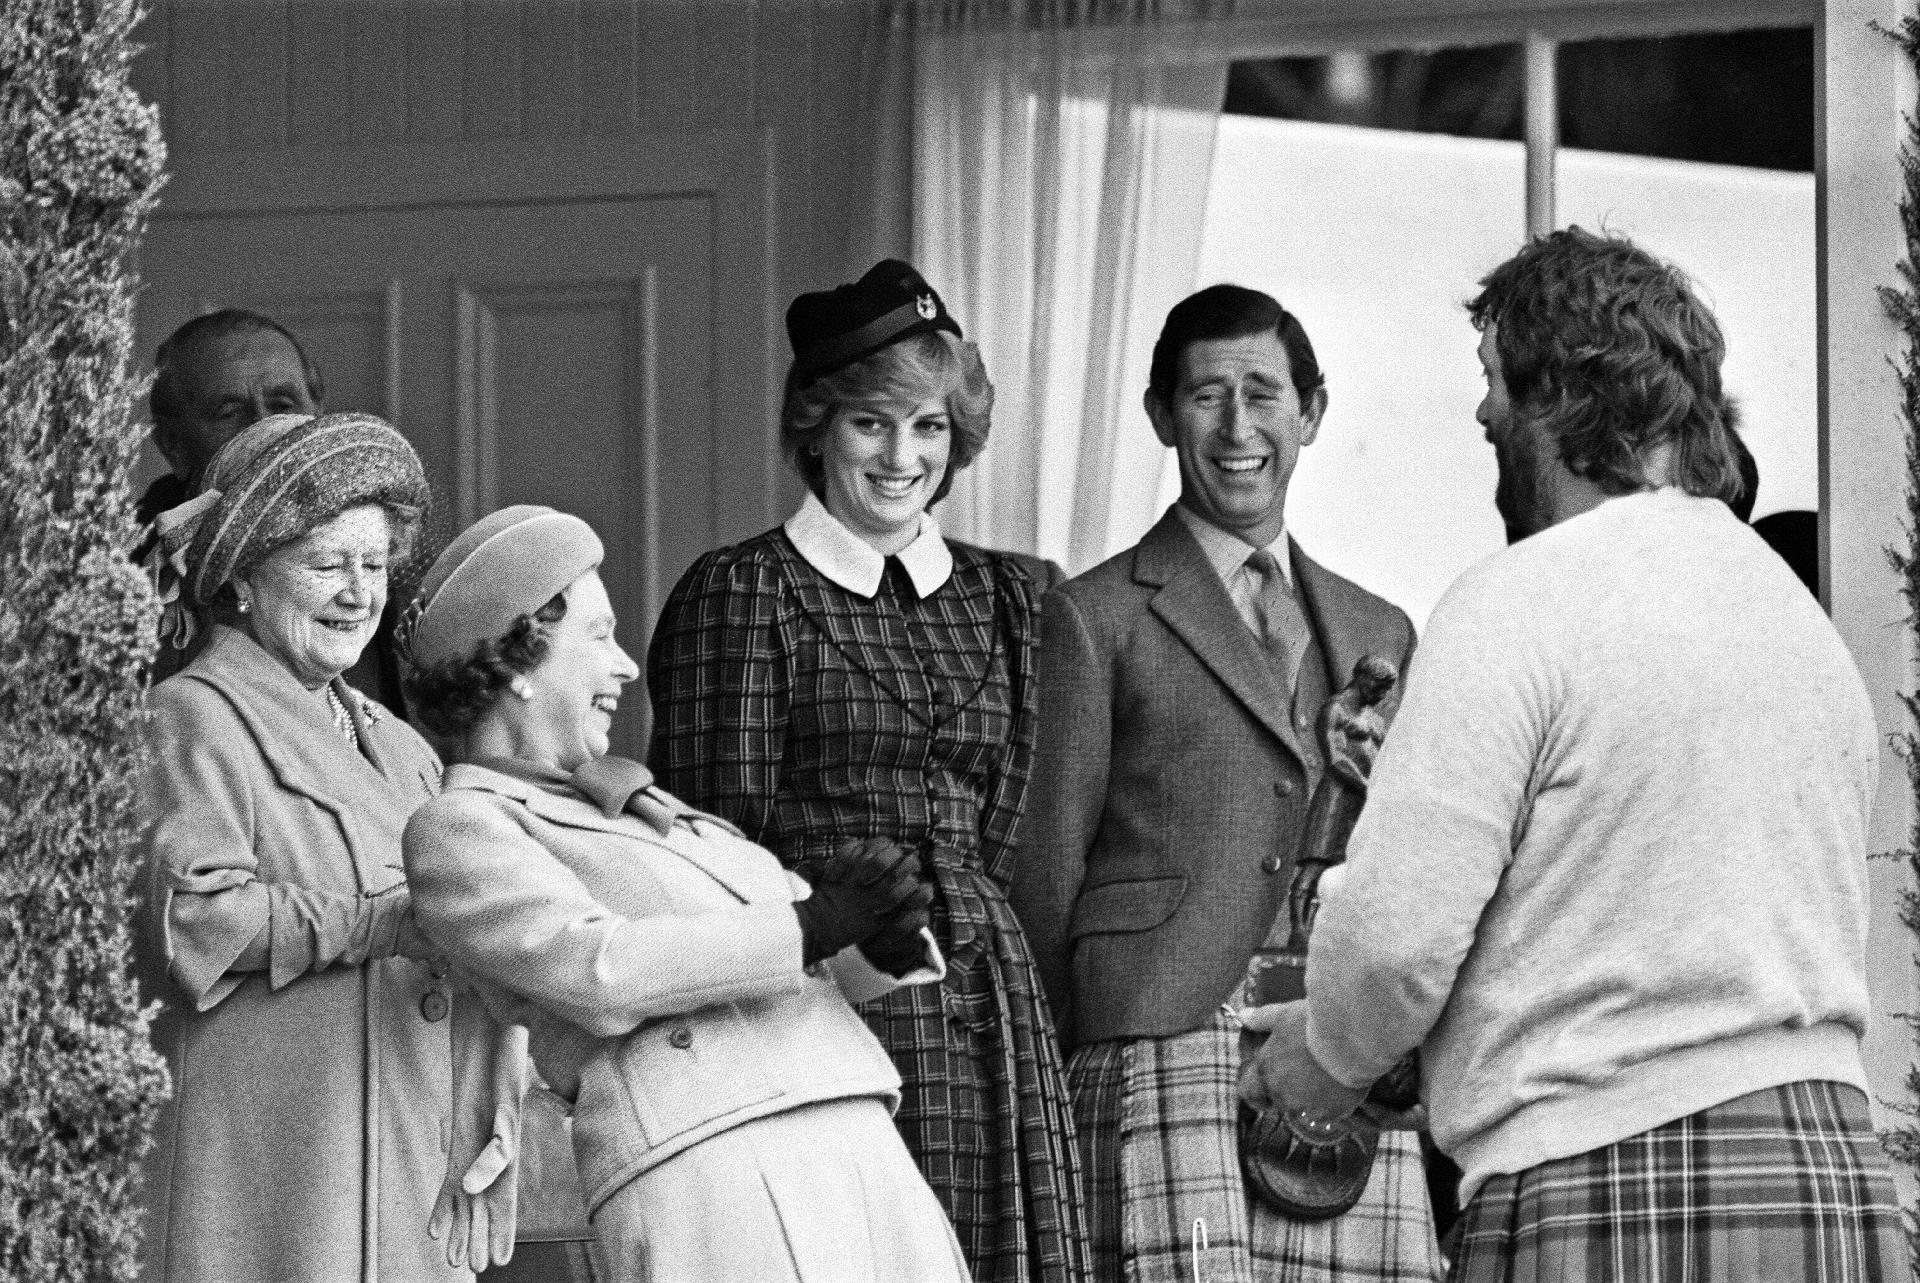 Queen Elizabeth II smiles with her family at an event in Scotland in 1982.  - Getty Images